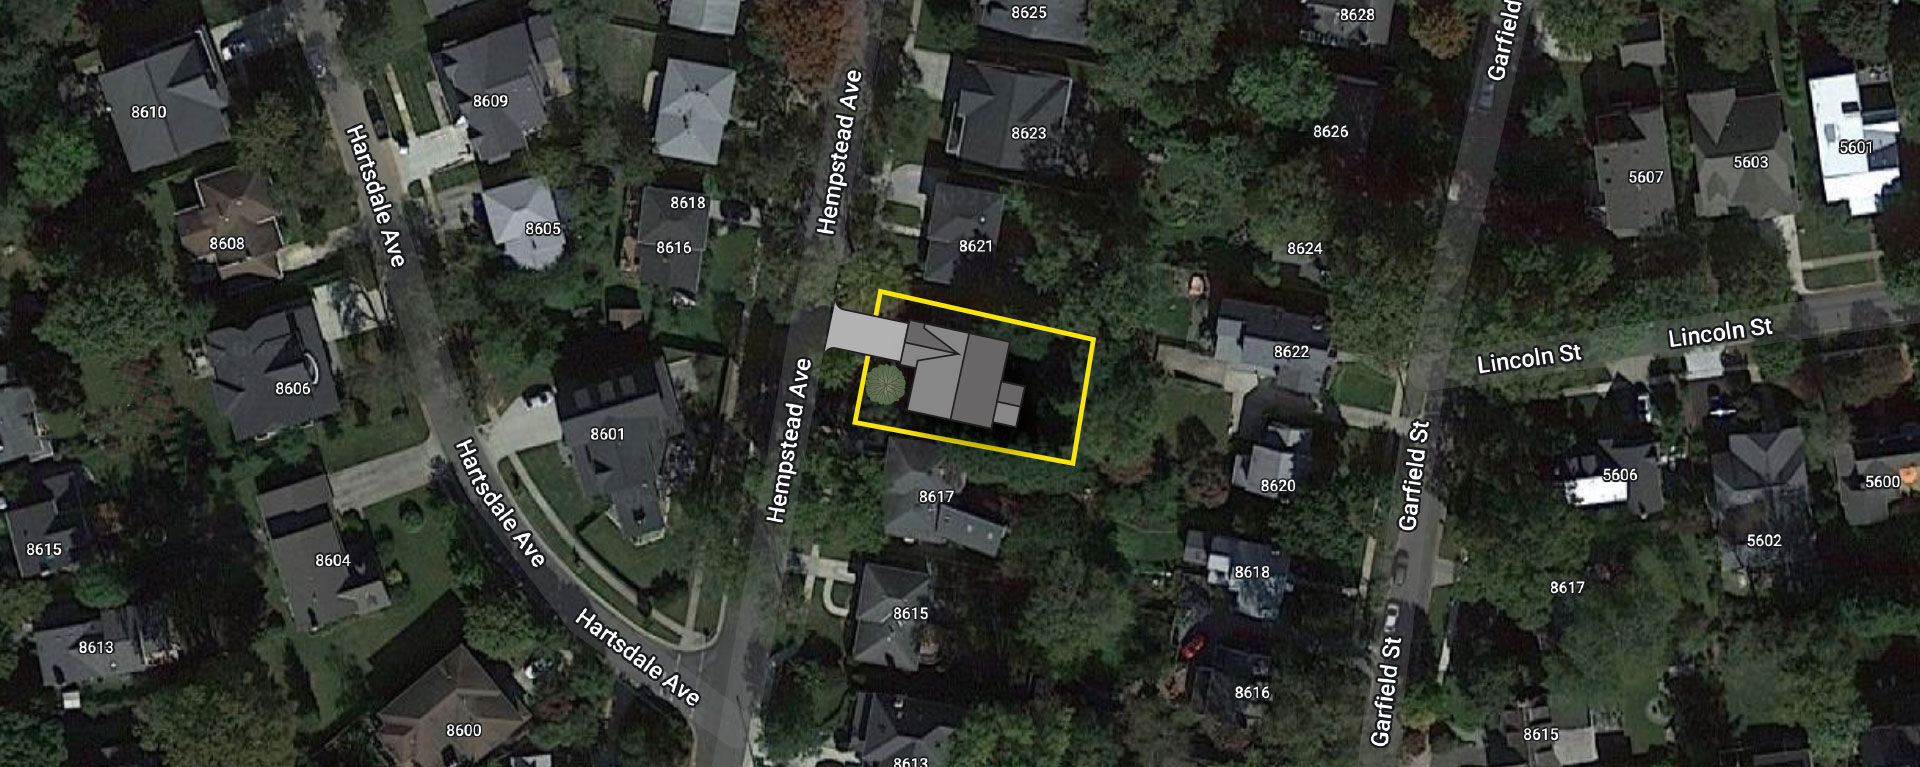 a satellite image showing the hempstead site outline and house placement superimposed